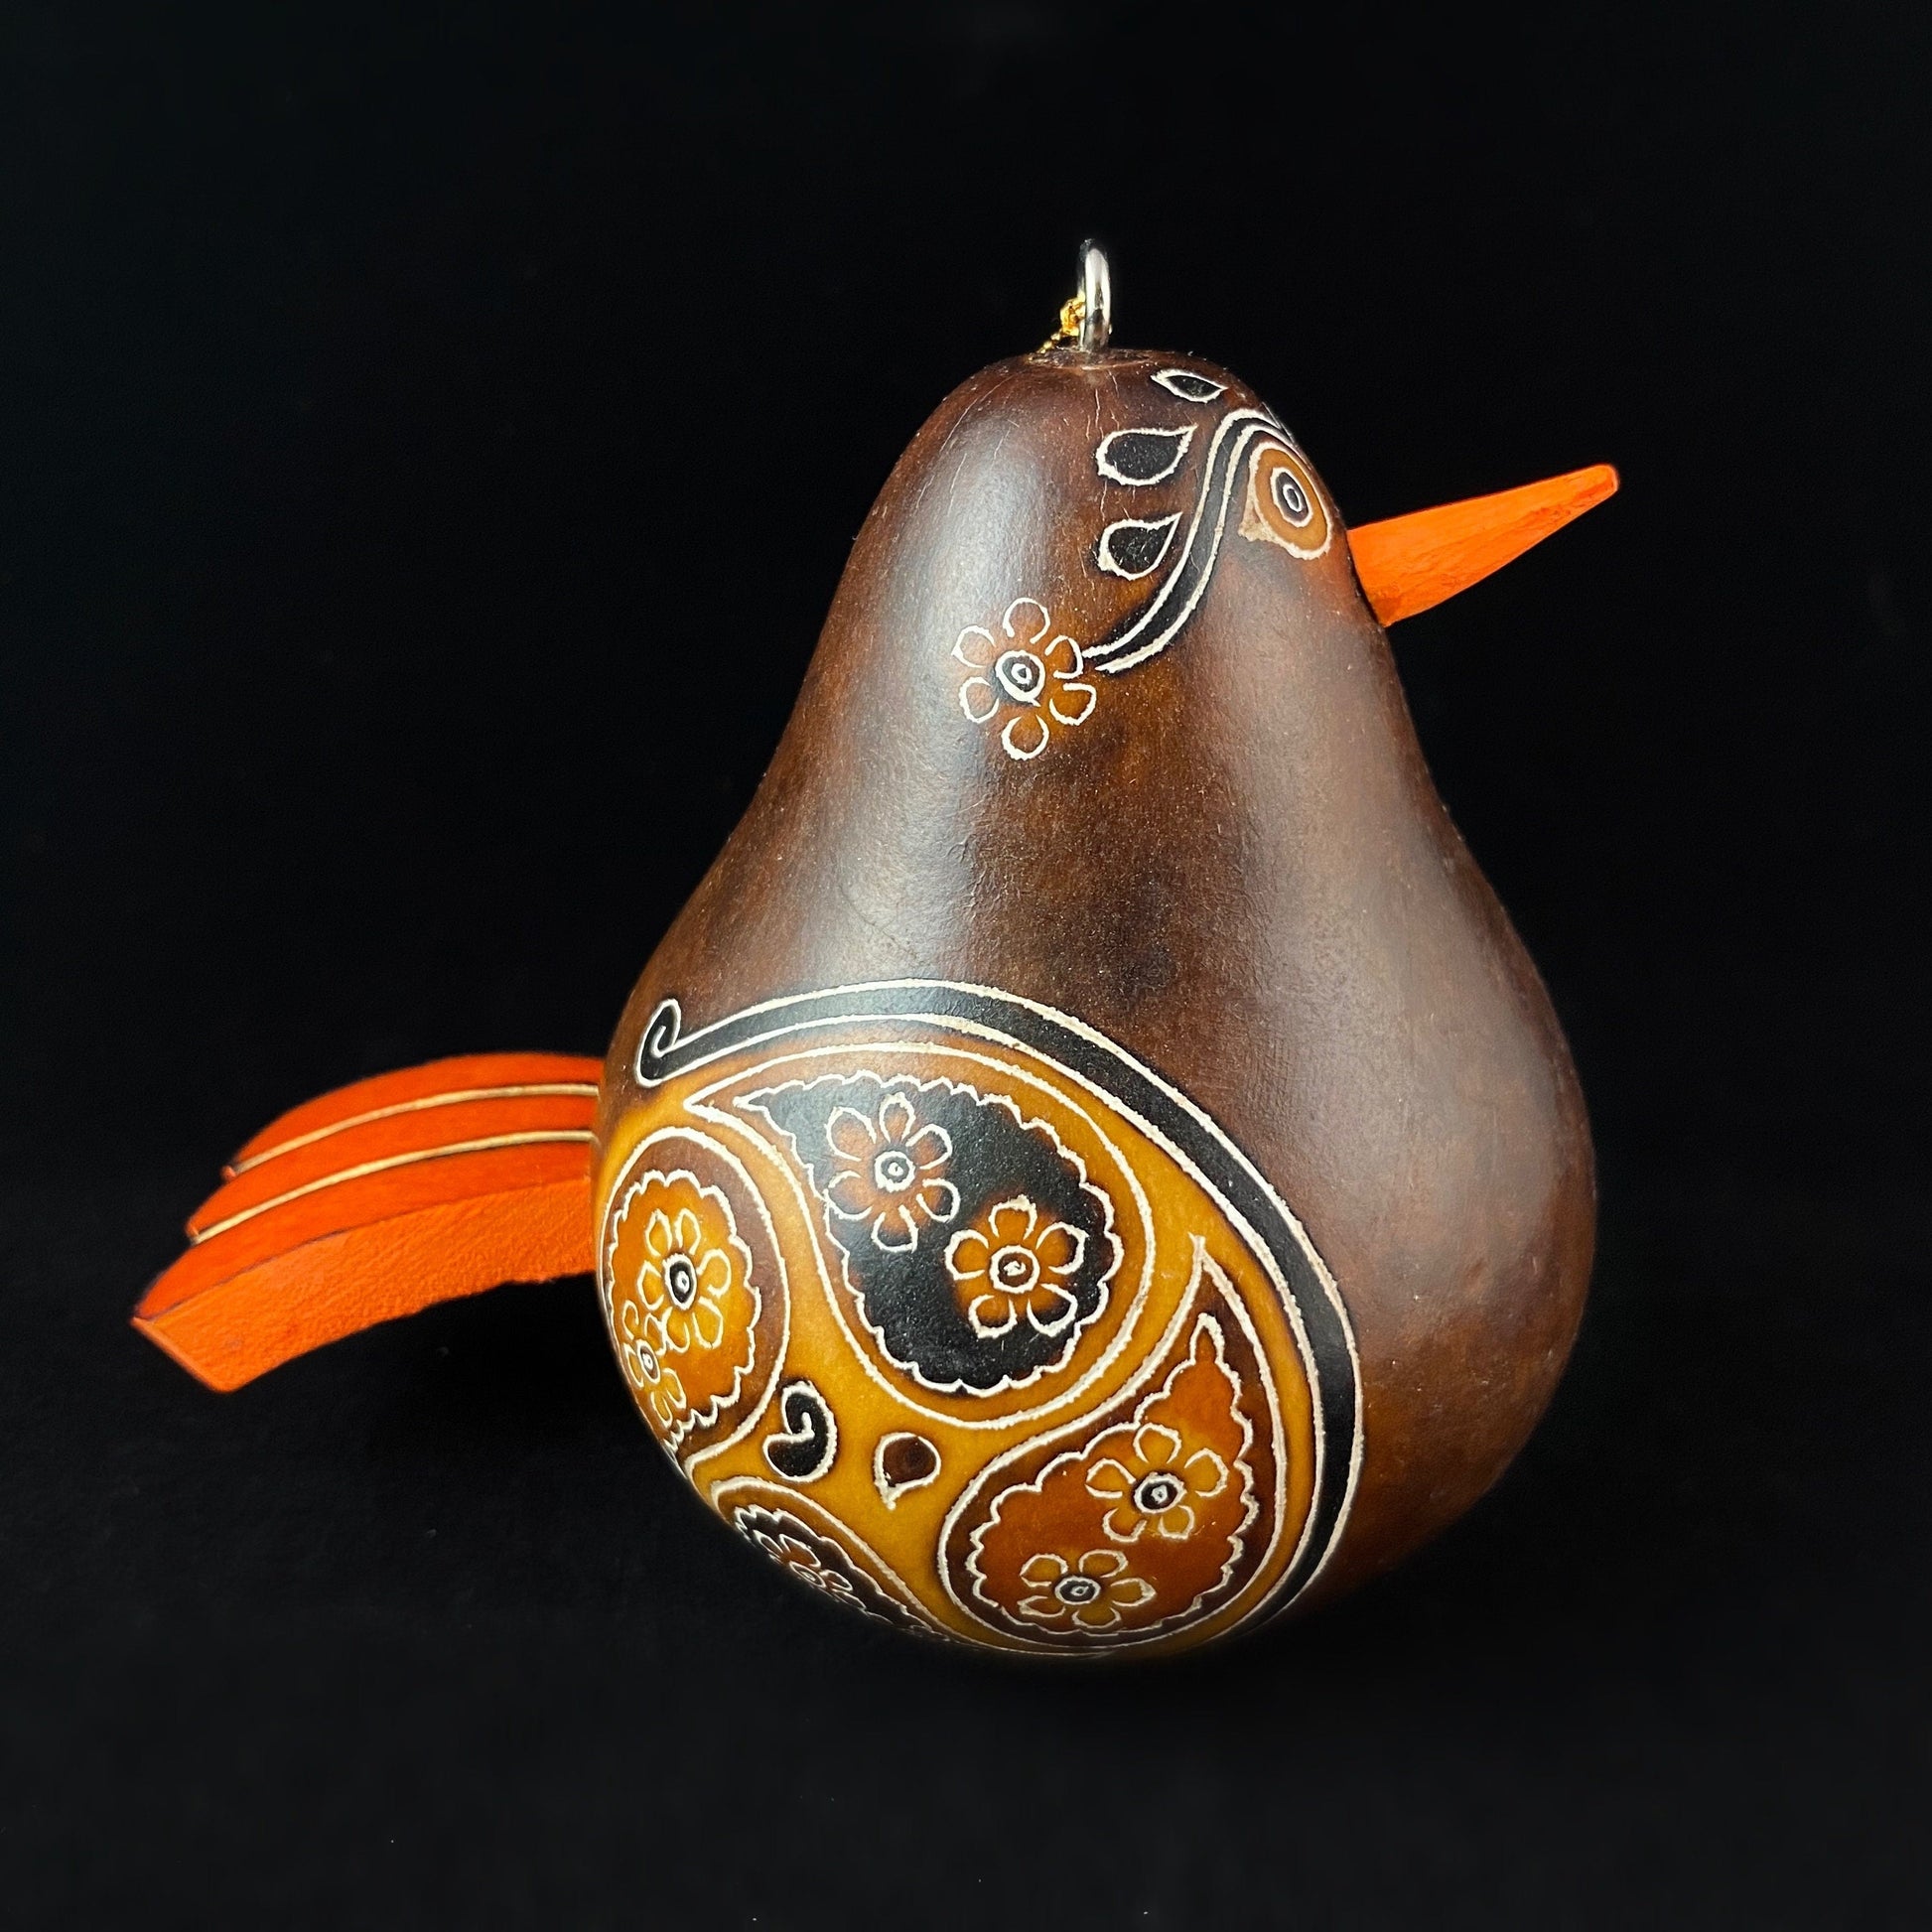 Decorative Brown Bird Ornament/Maraca - Hand-Carved and Hand Painted Peruvian Gourd